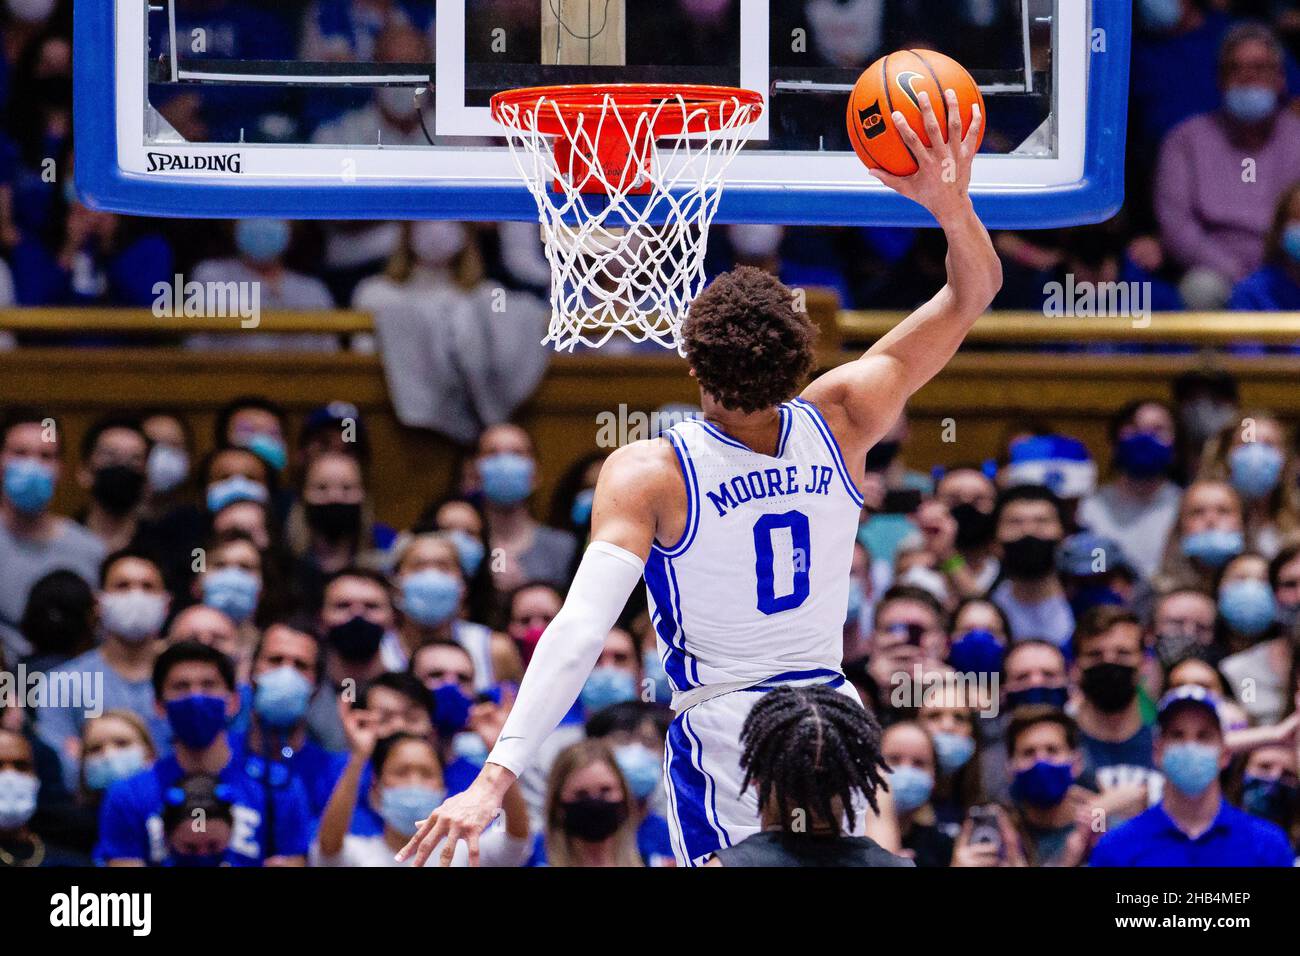 December 16, 2021: Duke Blue Devils forward Wendell Moore Jr. (0) goes for a slam dunk against the Appalachian State Mountaineers during the second half of the NCAA basketball matchup at Cameron Indoor in Durham, NC. (Scott Kinser/Cal Sport Media) Stock Photo